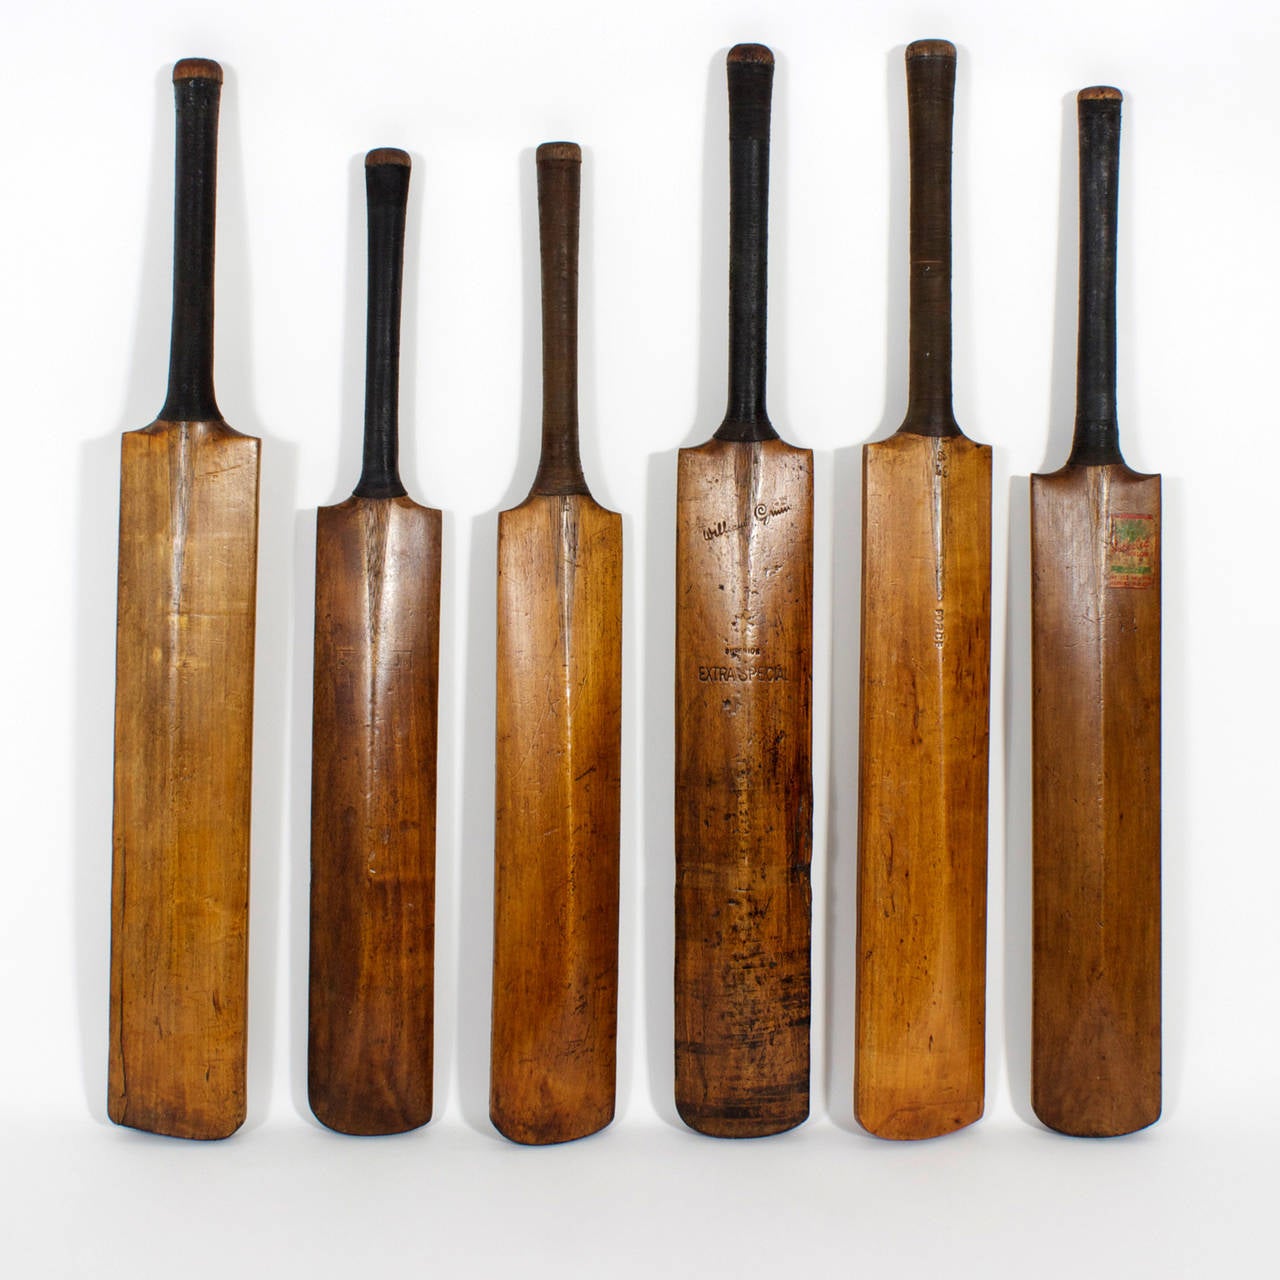 Sporting Art Collection of Fvie Cricket Bats, Great Color and Patina